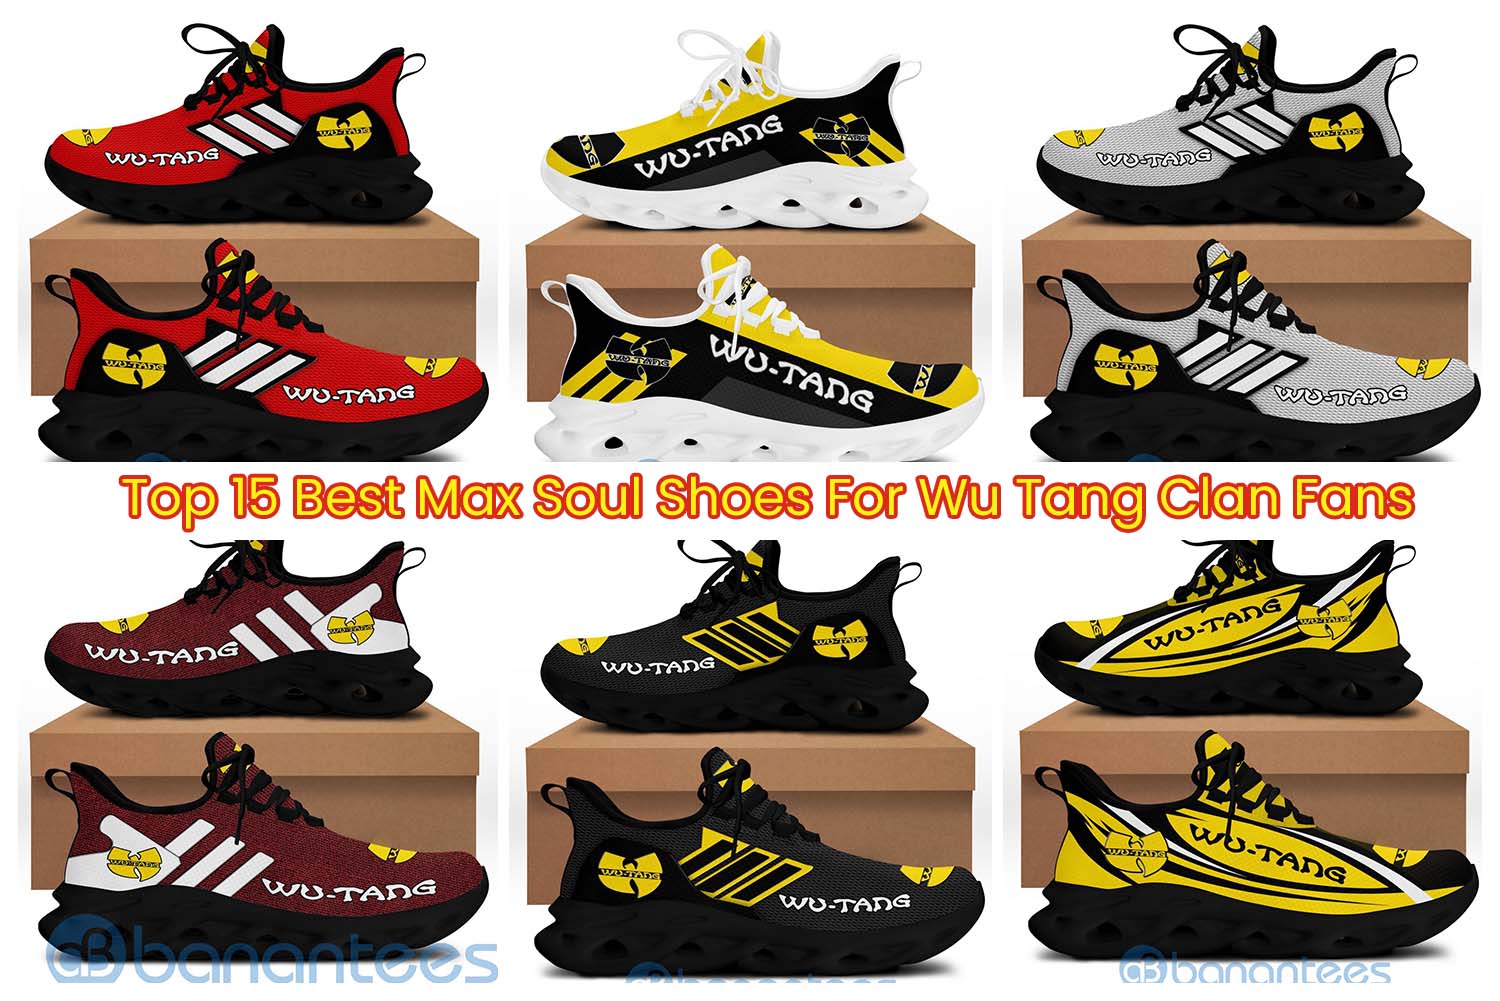 Top 15 Best Max Soul Shoes For Wu Tang Clan Fans